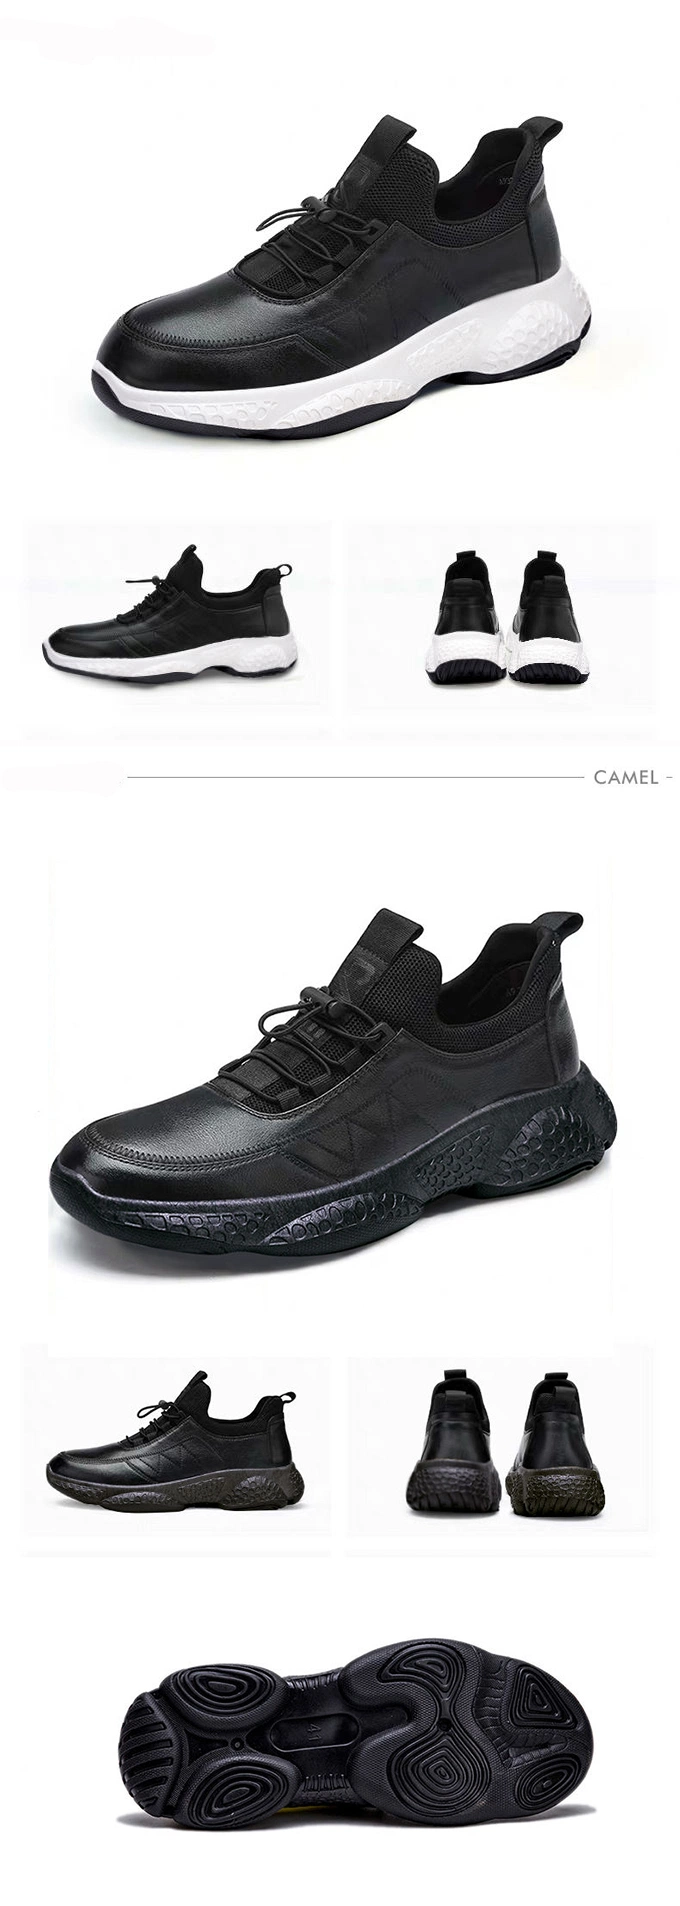 2020 China Factory High Quality PU Upper Shoes Lace up School Boys Plain Black Classic Sports Casual Shoes for Men